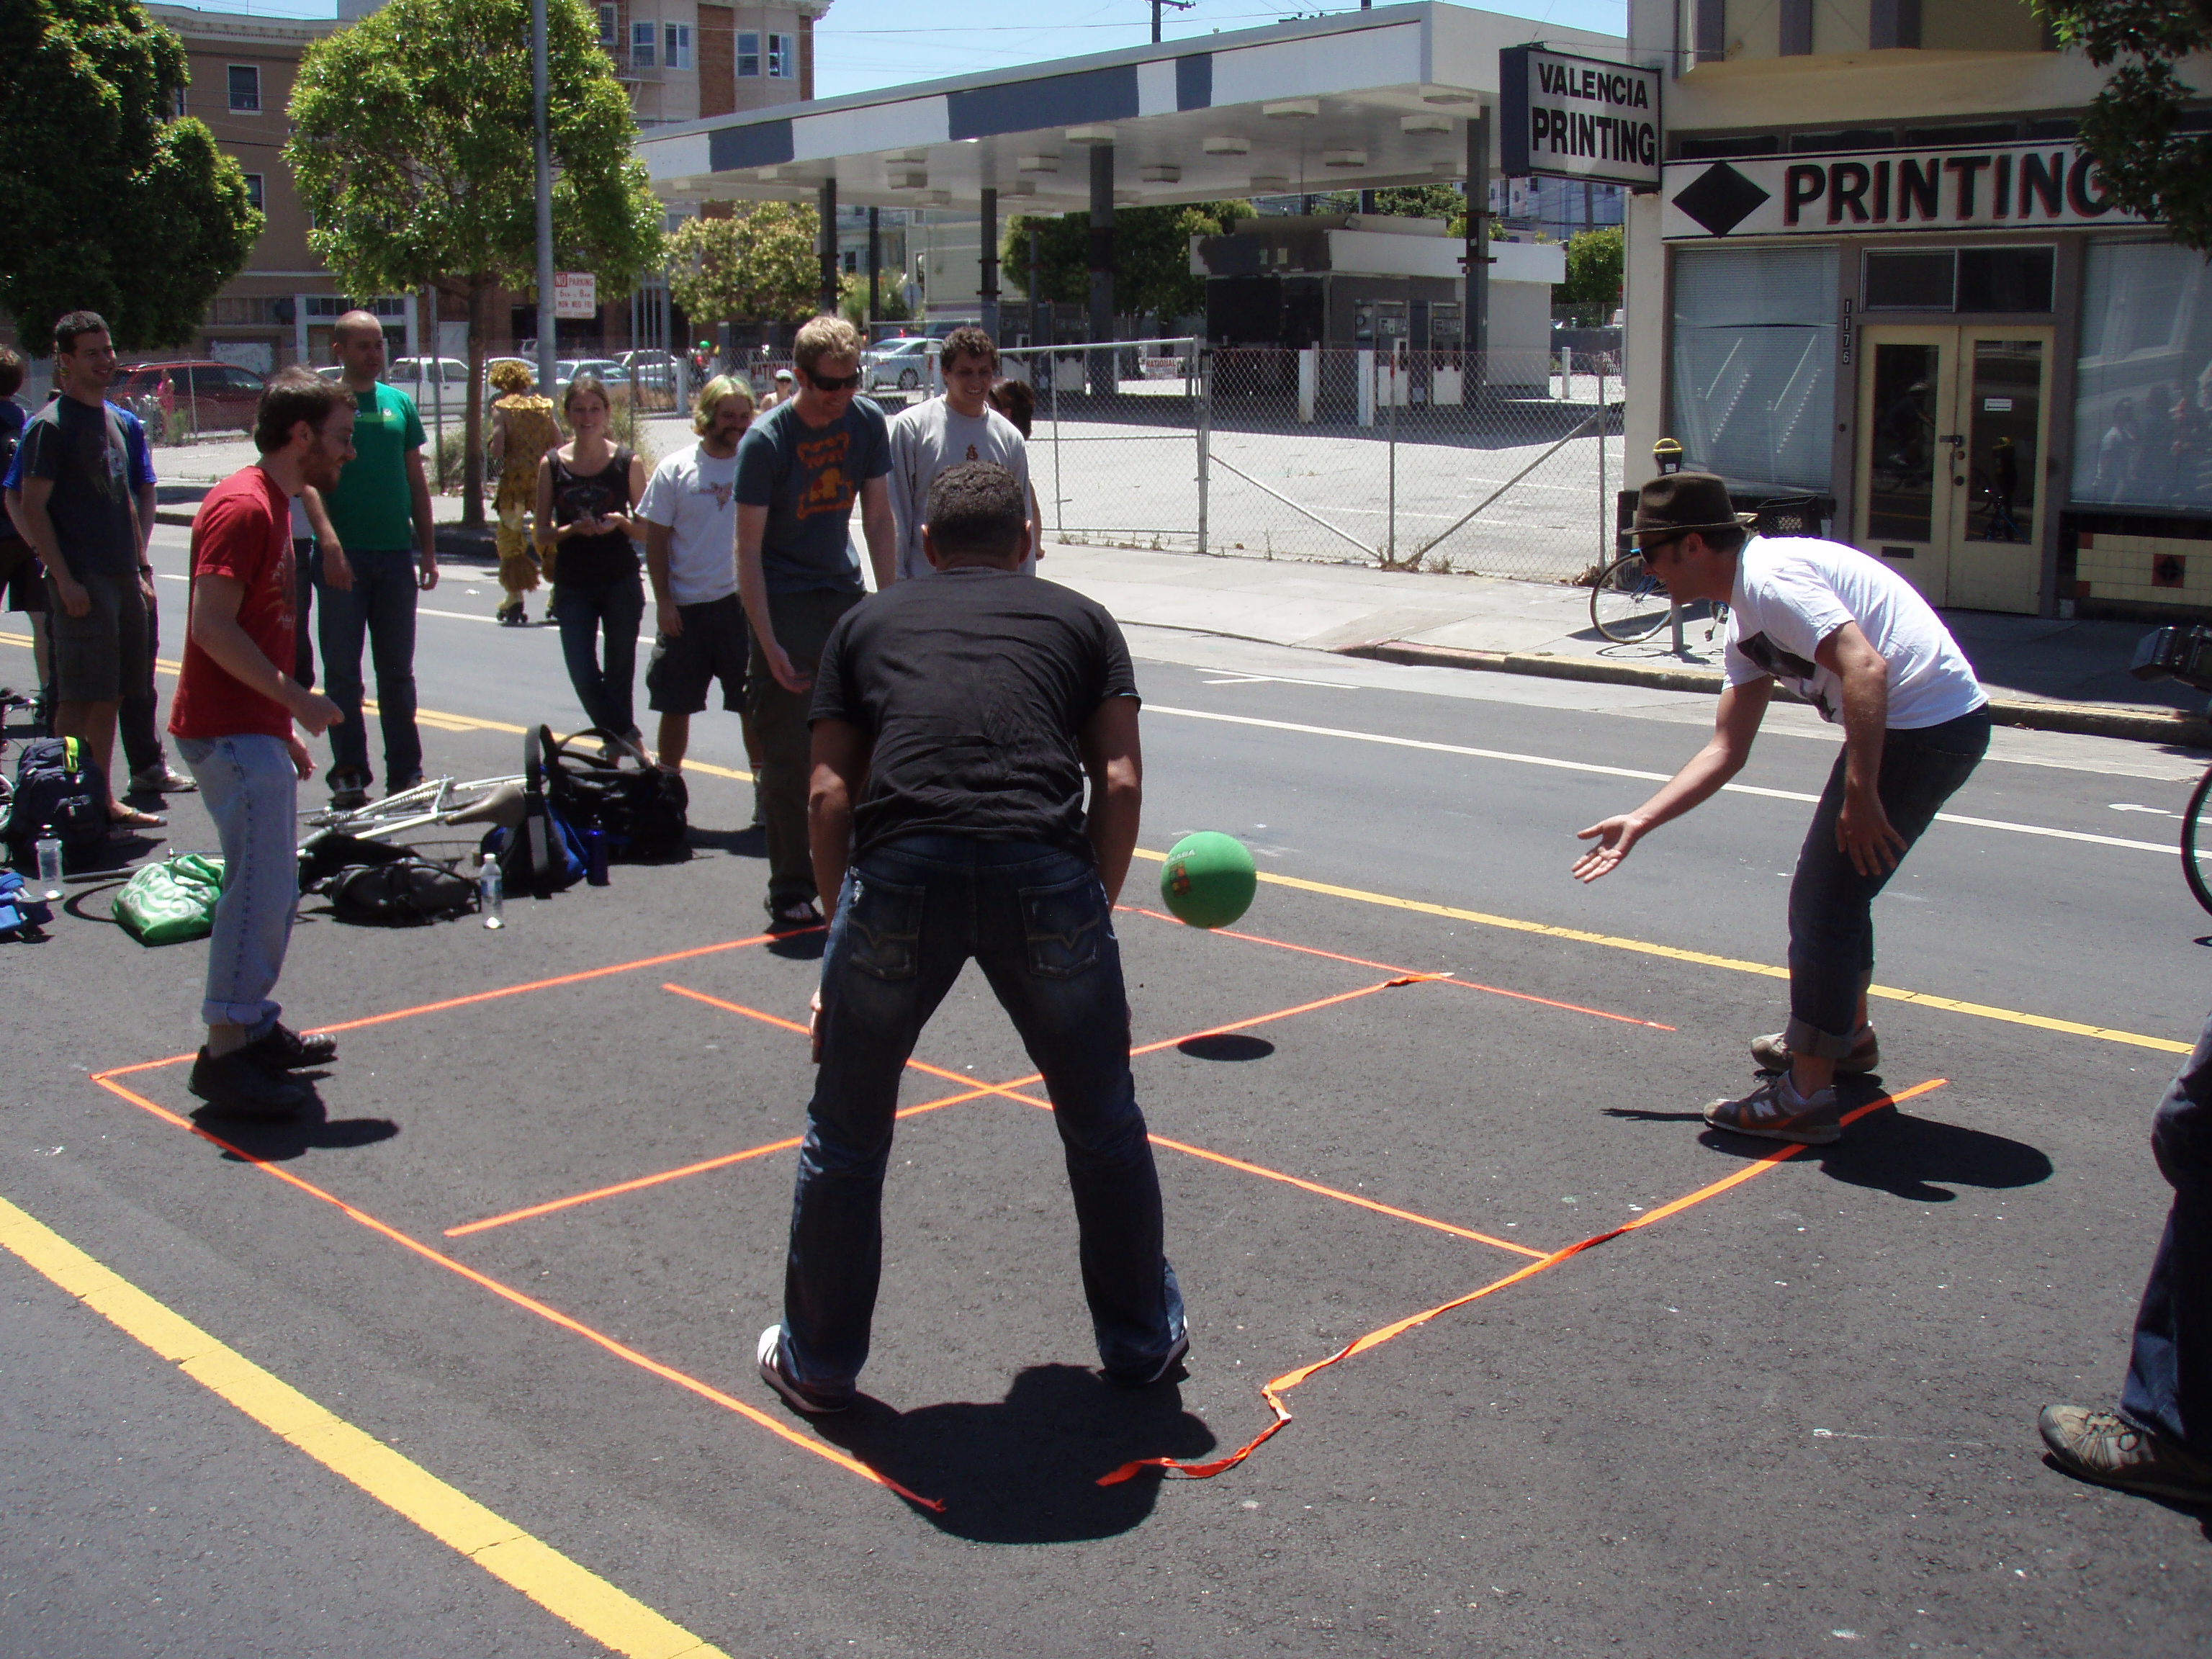 Finally, my favorite thing was watching adults completely forget how to play playground games.